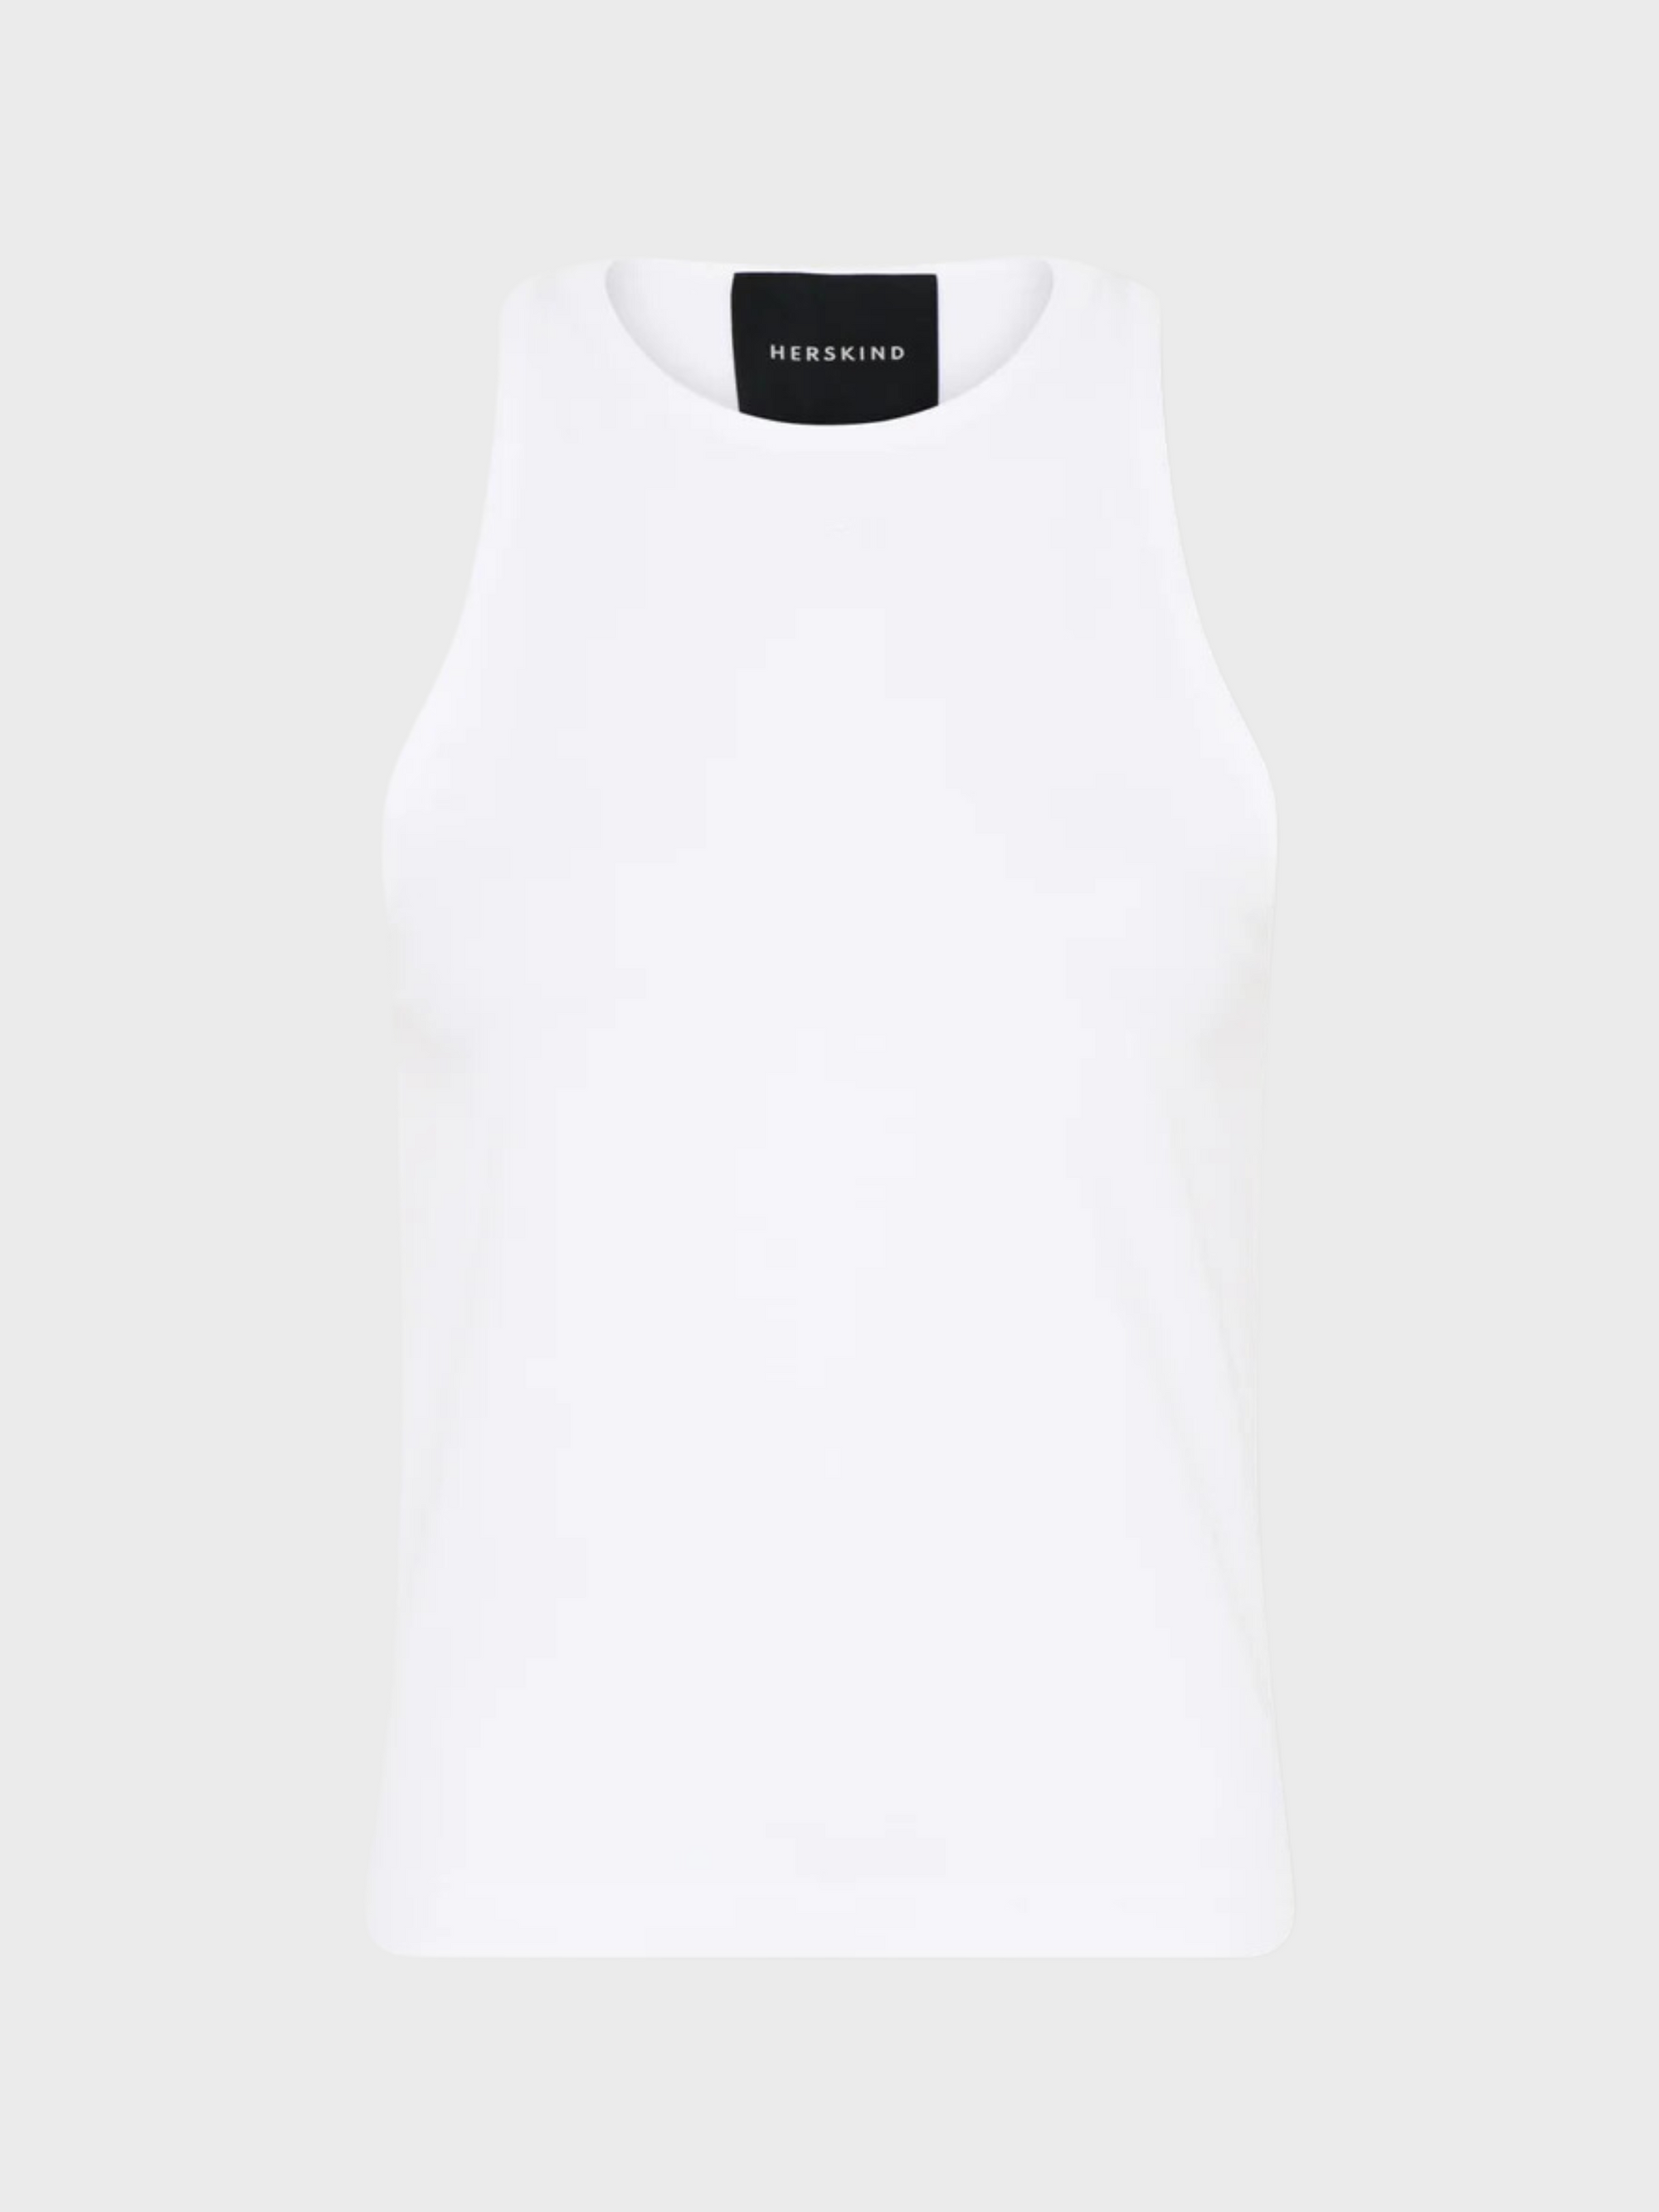 Herskind Linea Top White-T-Shirts-West of Woodward Boutique-Vancouver-Canada